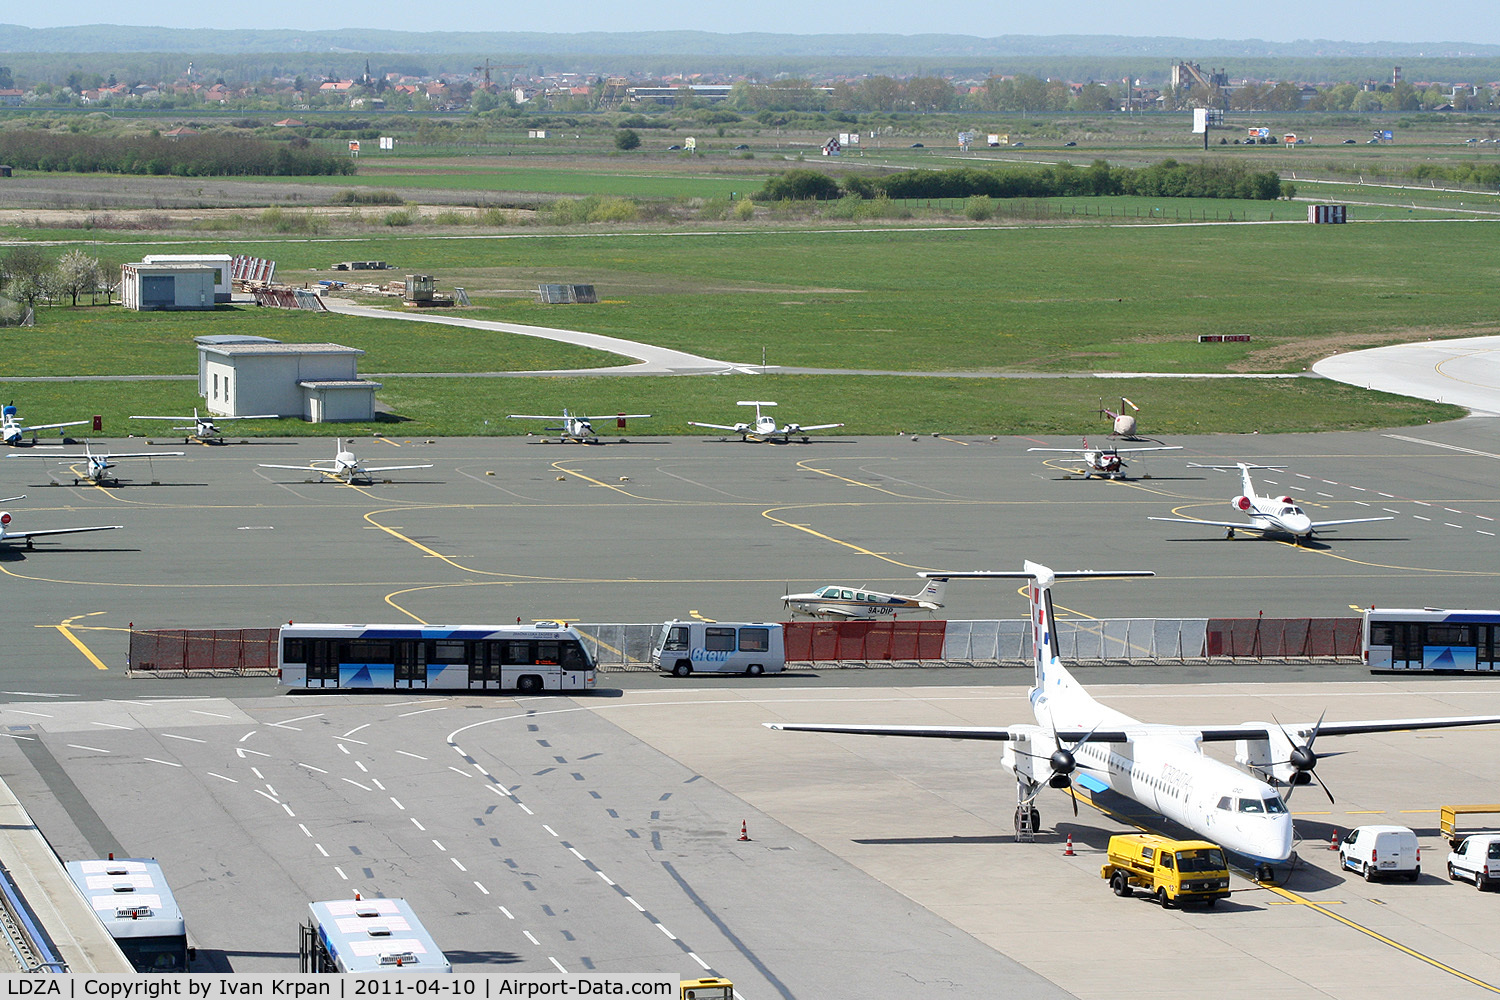 Zagreb Pleso Airport, Zagreb Croatia (LDZA) - Here is visible GA platform. She is located on far western side of the Zagreb airport main platform.